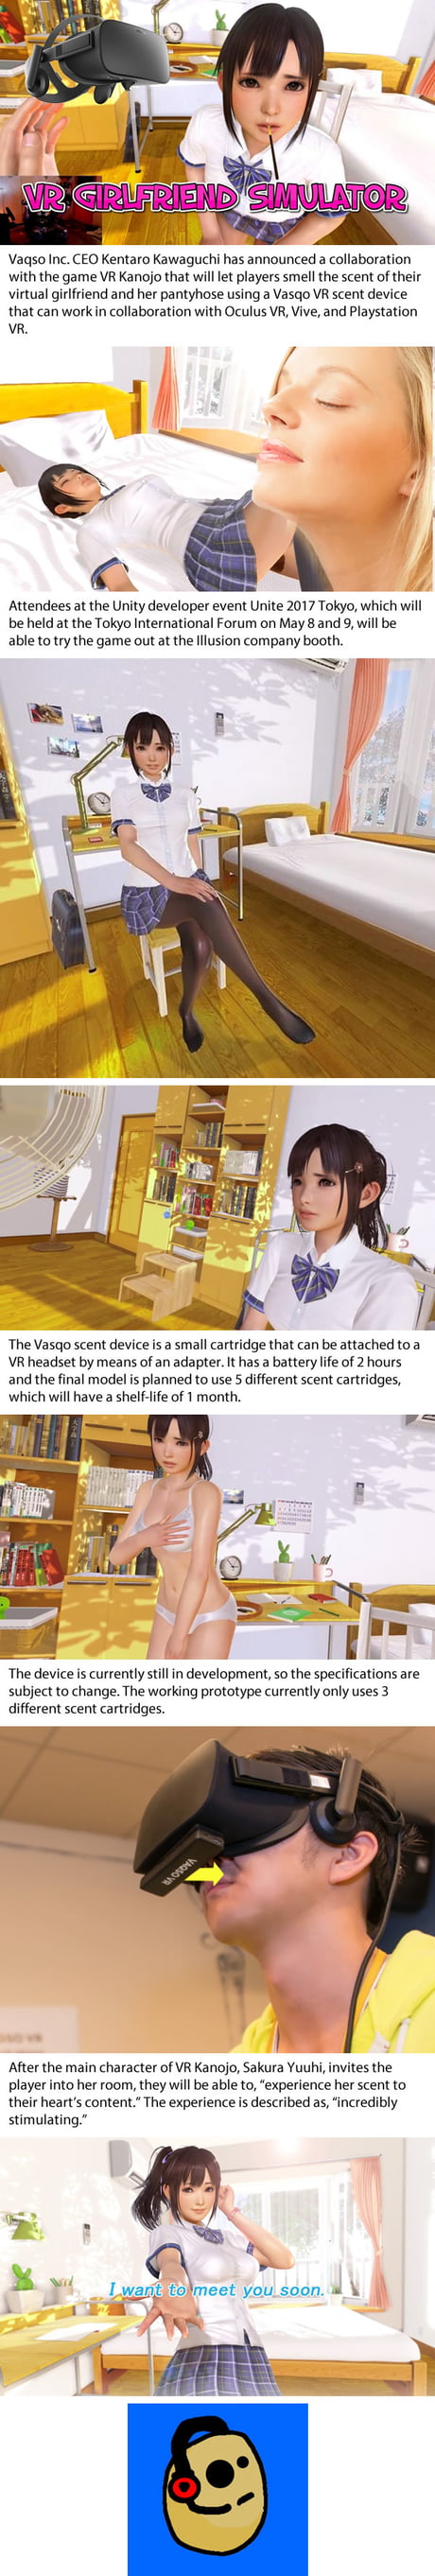 VR Kanojo Adult Game Collaboration Lets Sniff Virtual Girlfriend's Pantyhose -